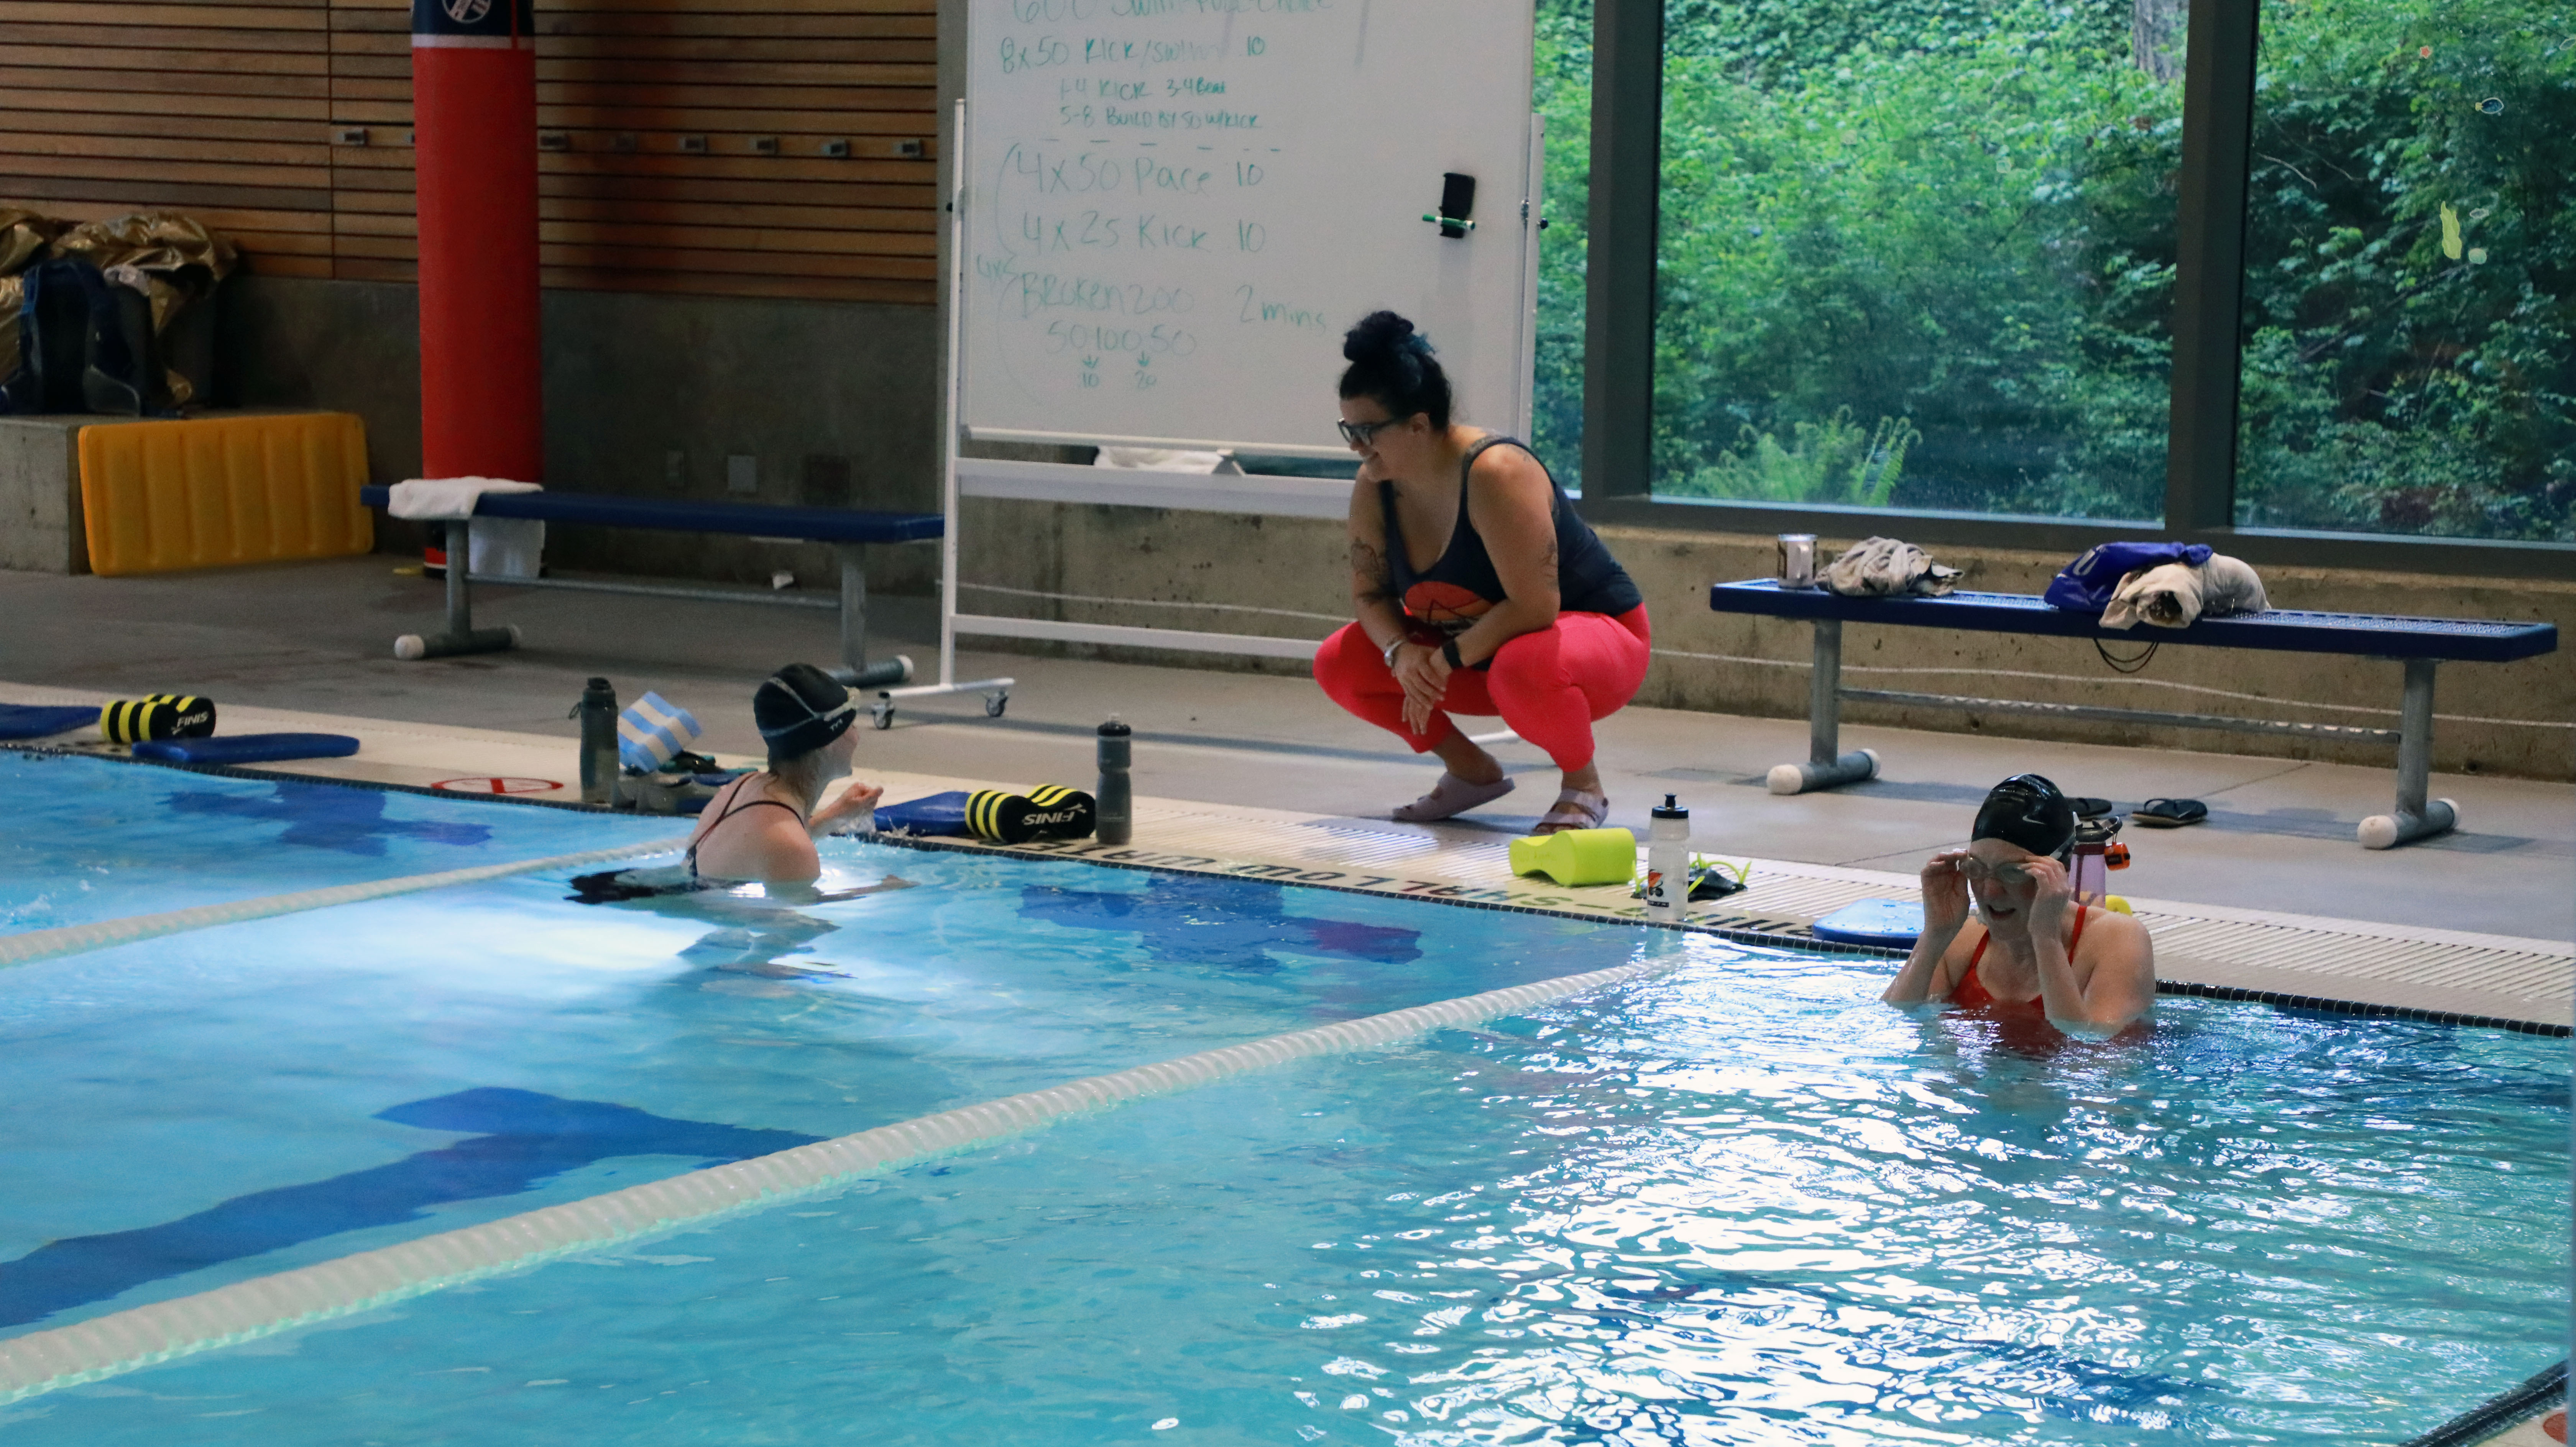 two patrons swimming in the WWU Rec Center pool taking instruction from the swim instructor